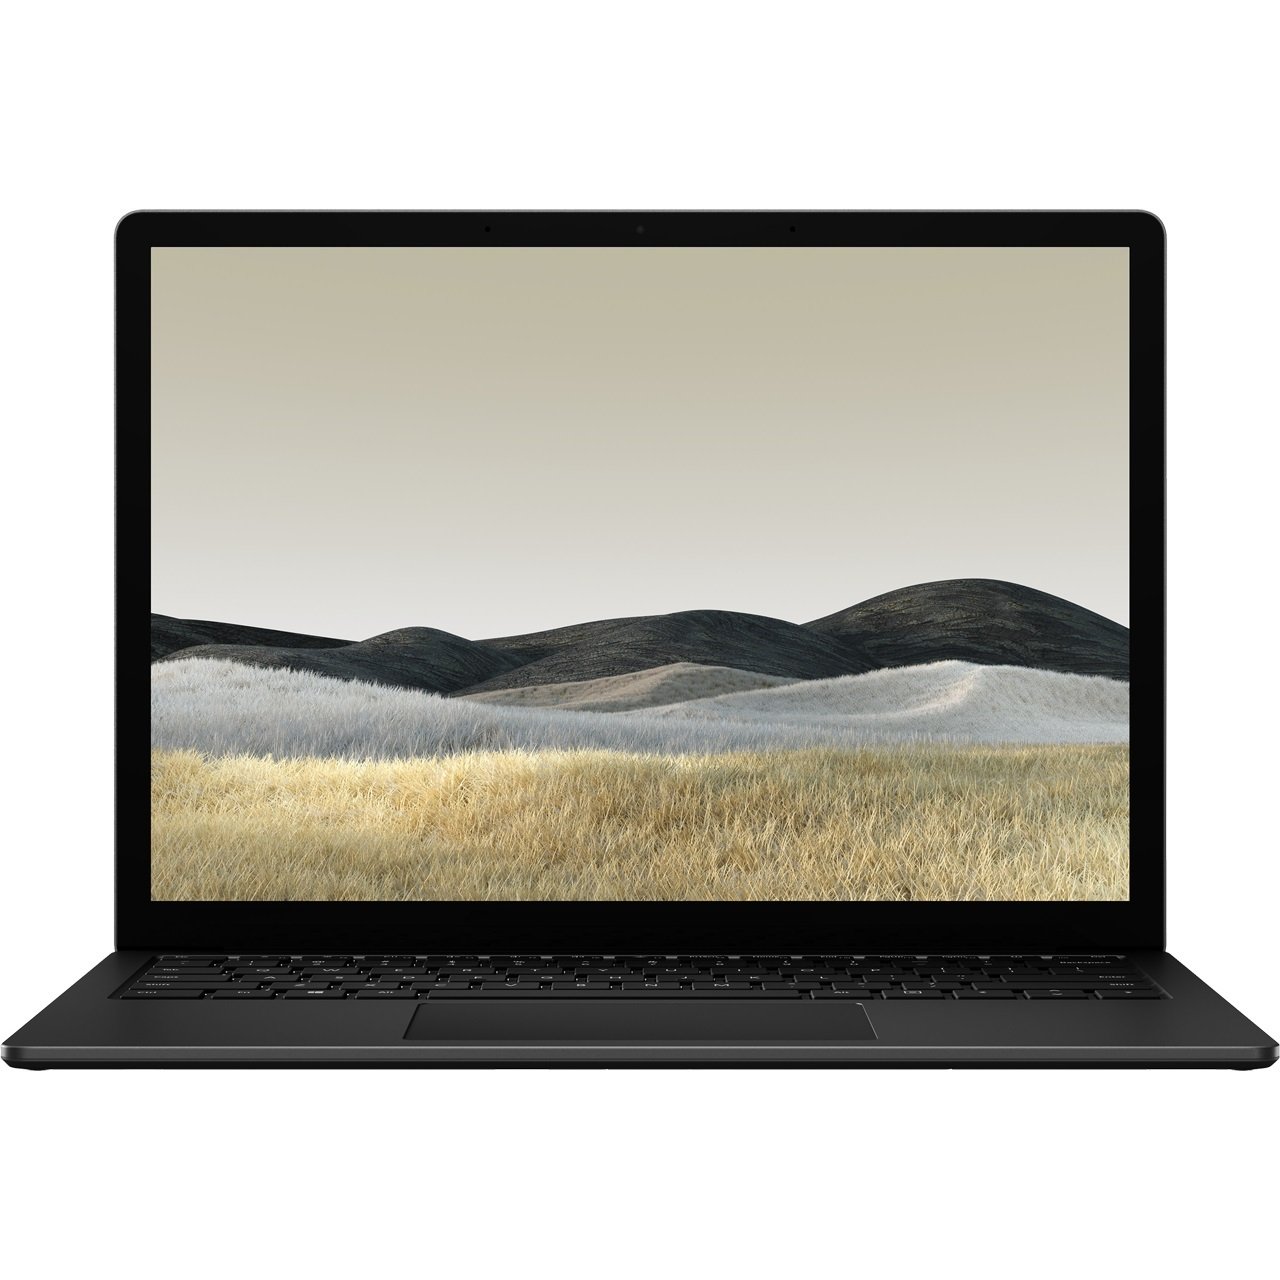 Microsoft Surface Laptop 3 13.5in i5 8GB 256GB Review